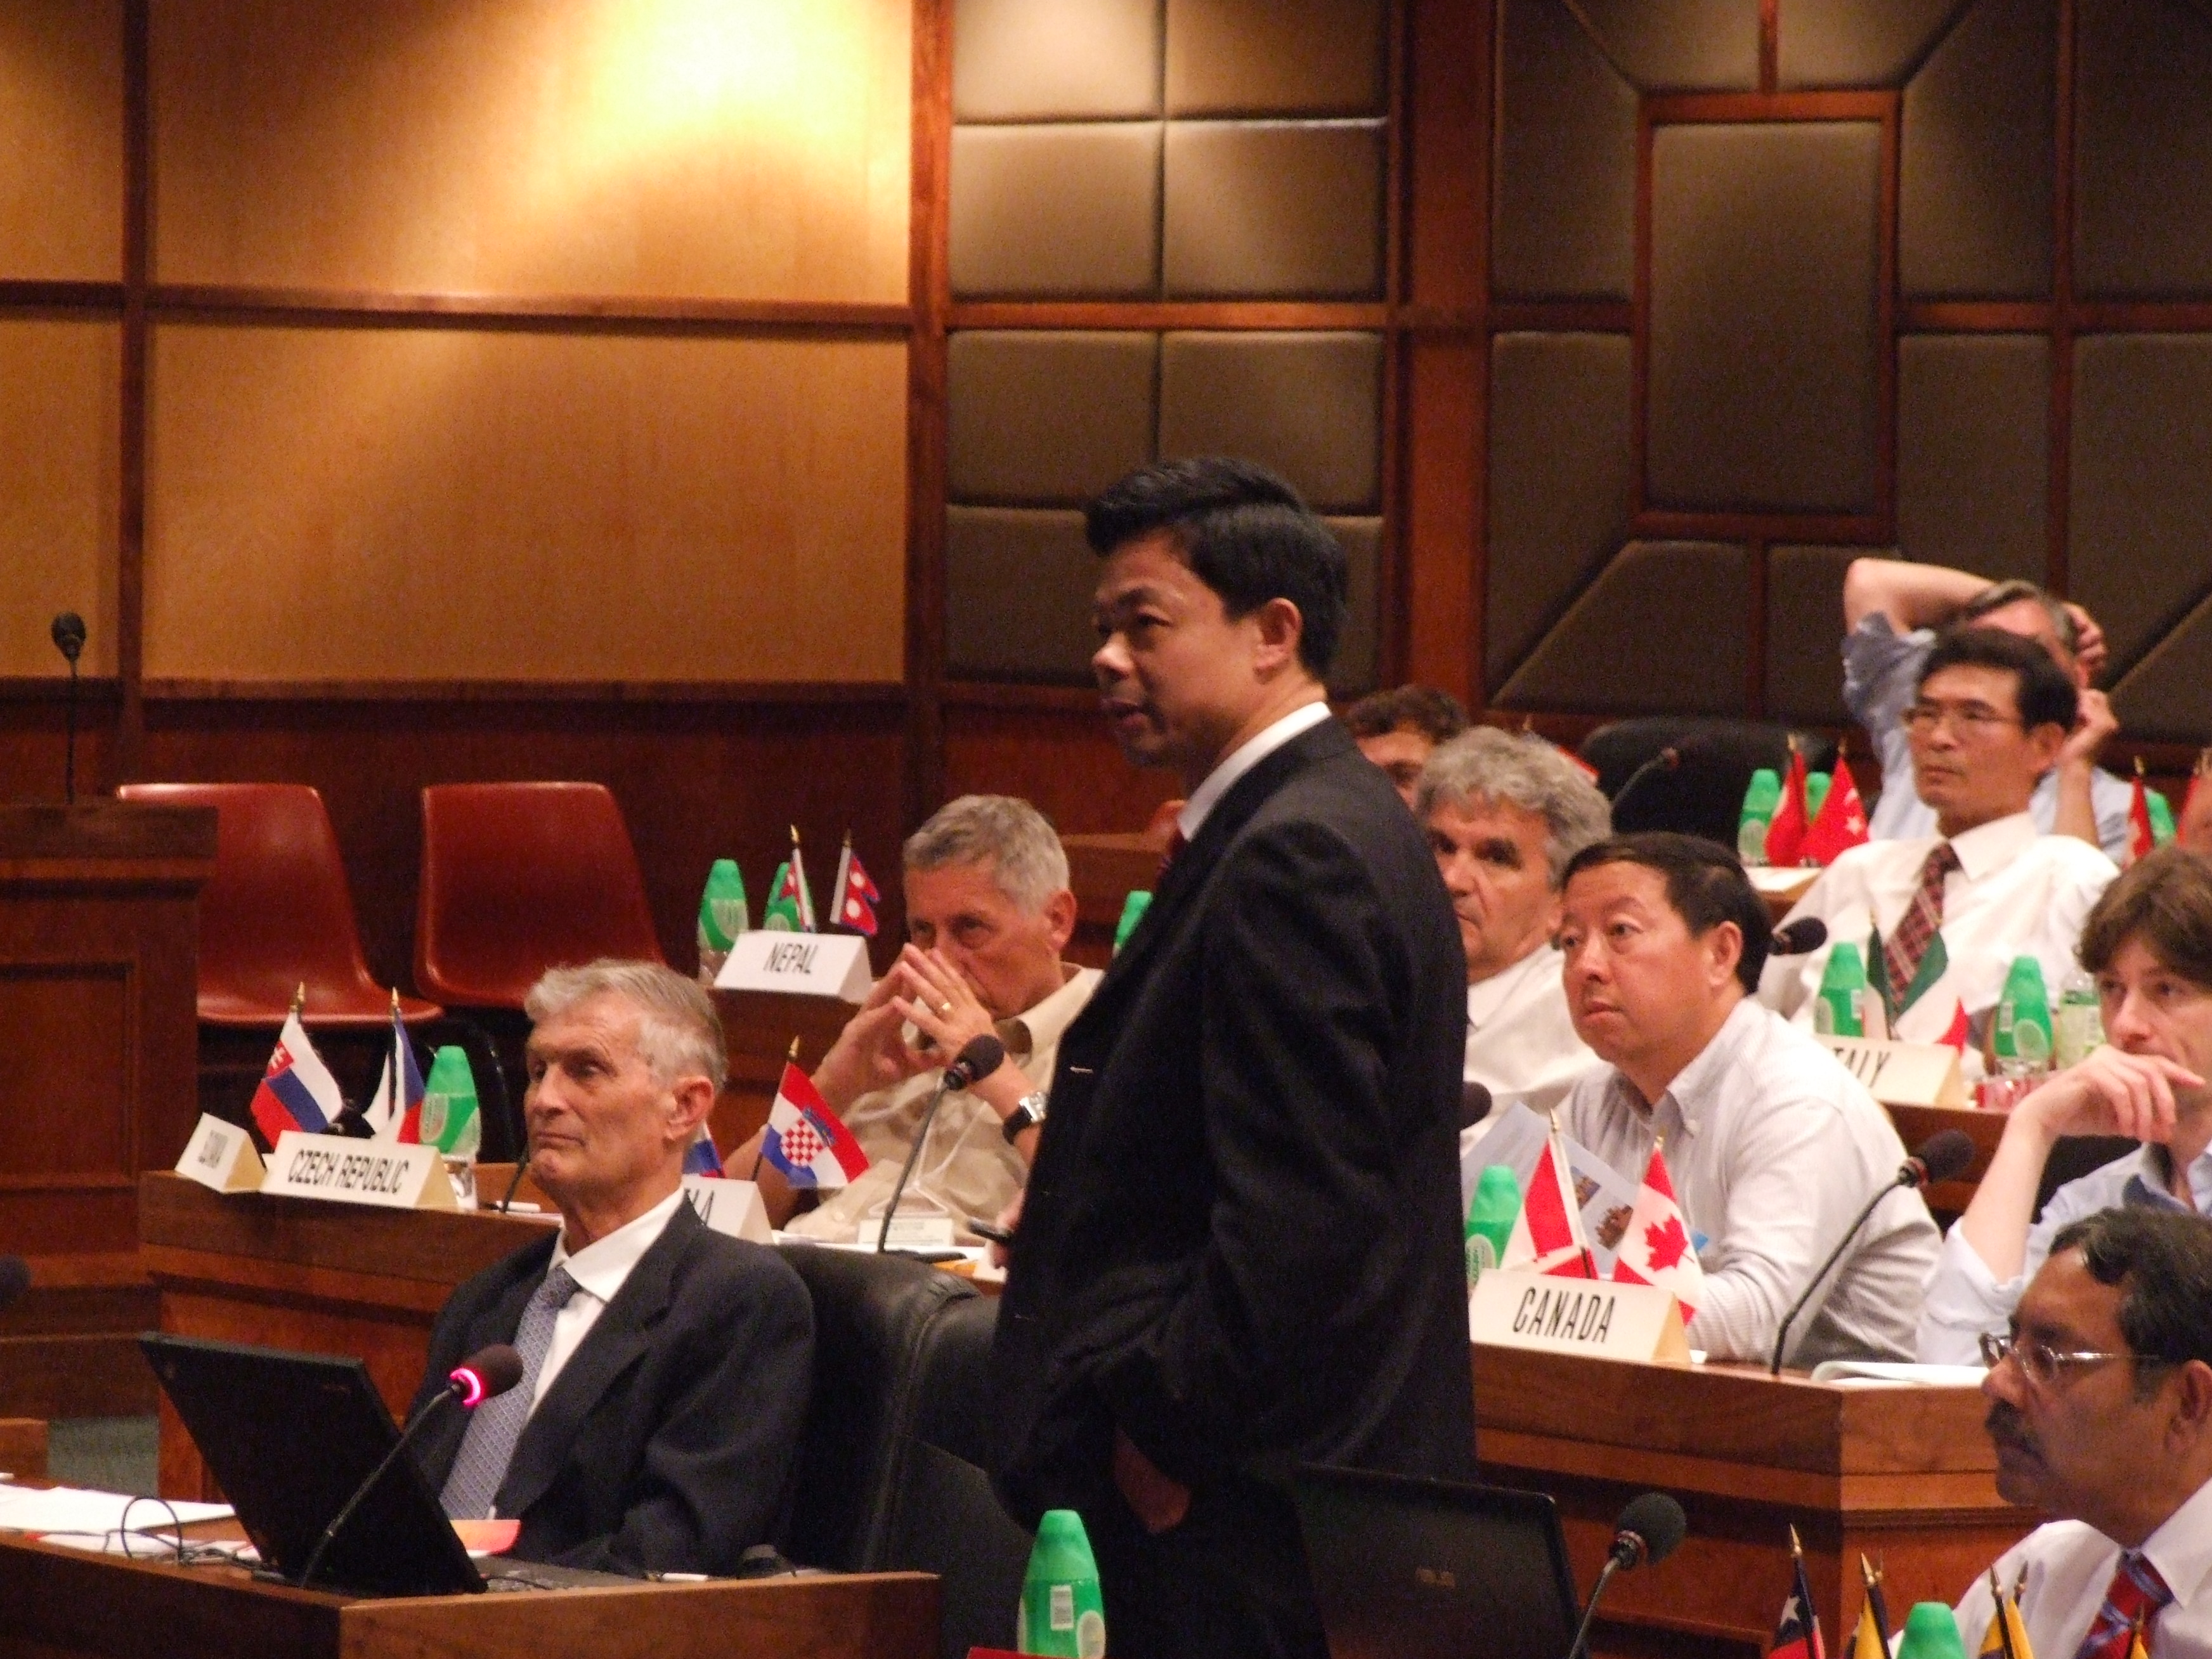 Prof. Xia-ting Feng elected as ISRM President for 2011-2015